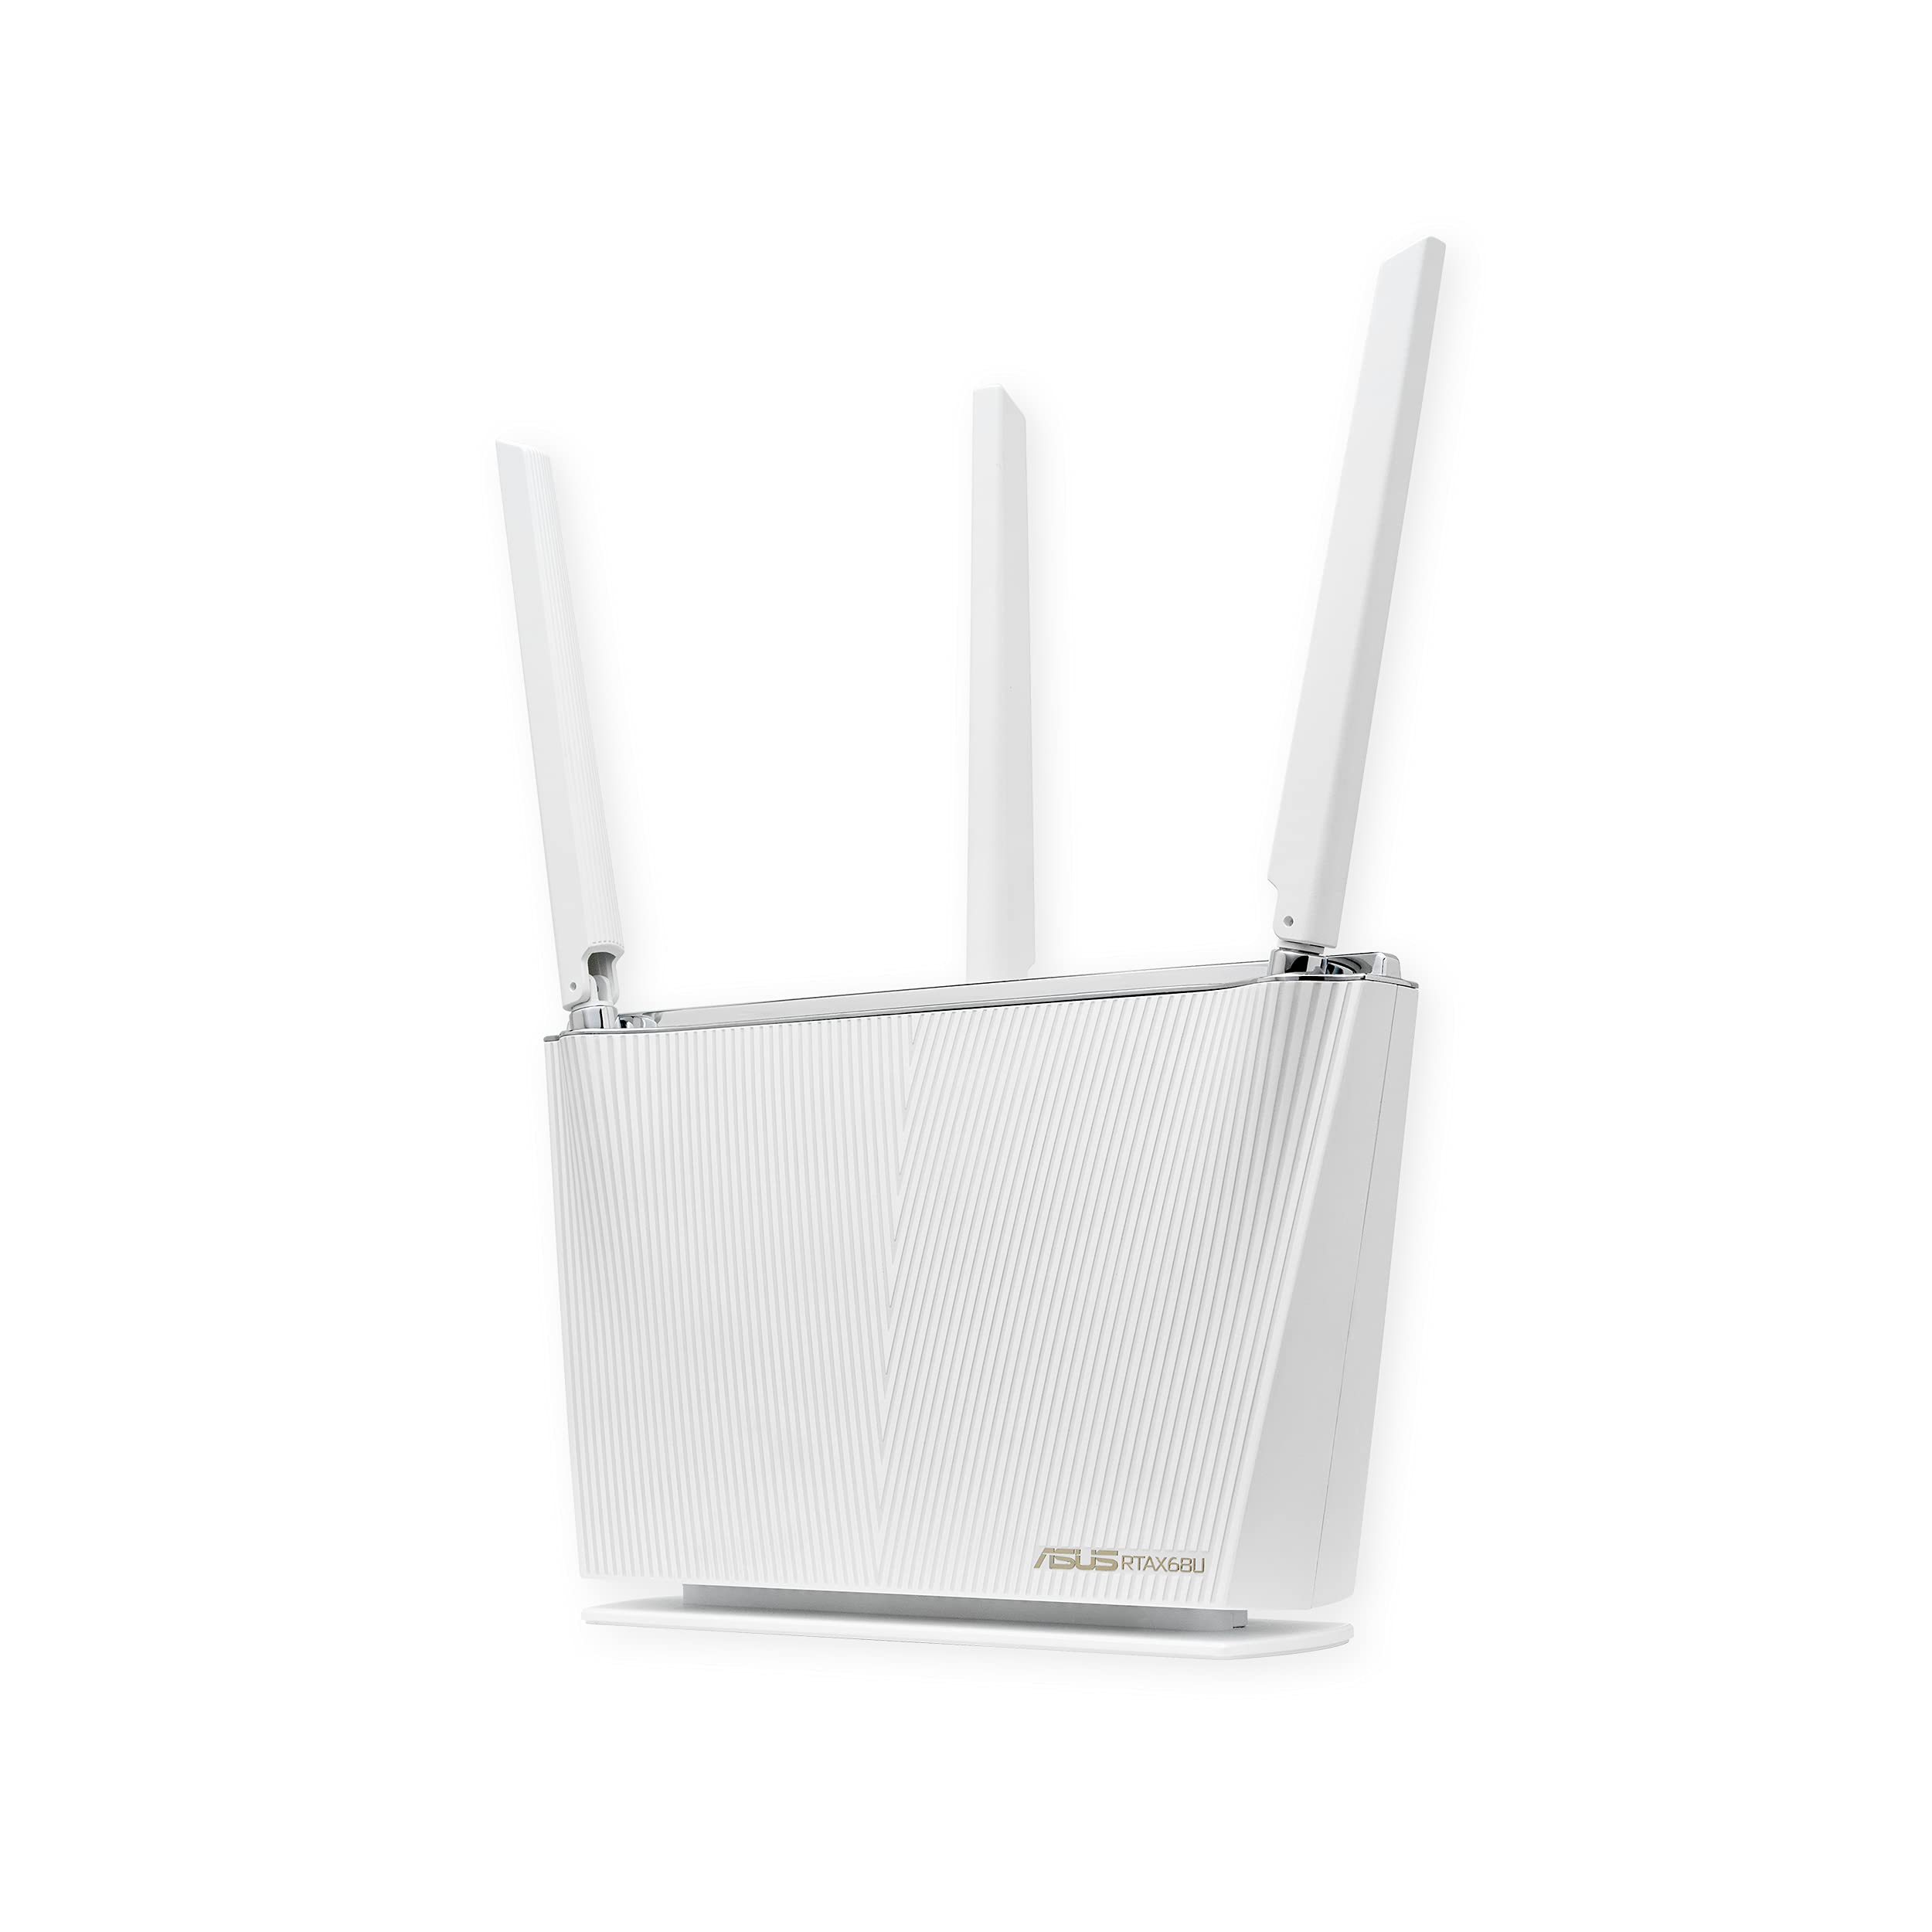 ASUS WiFi 6 Router (RT-AX68U White) - Dual Band Gigabit Wireless Router, 3x3 Support, Gaming & Streaming, AiMesh Compatible, Included Lifetime Internet Security, Parental Control, MU-MIMO, OFDMA